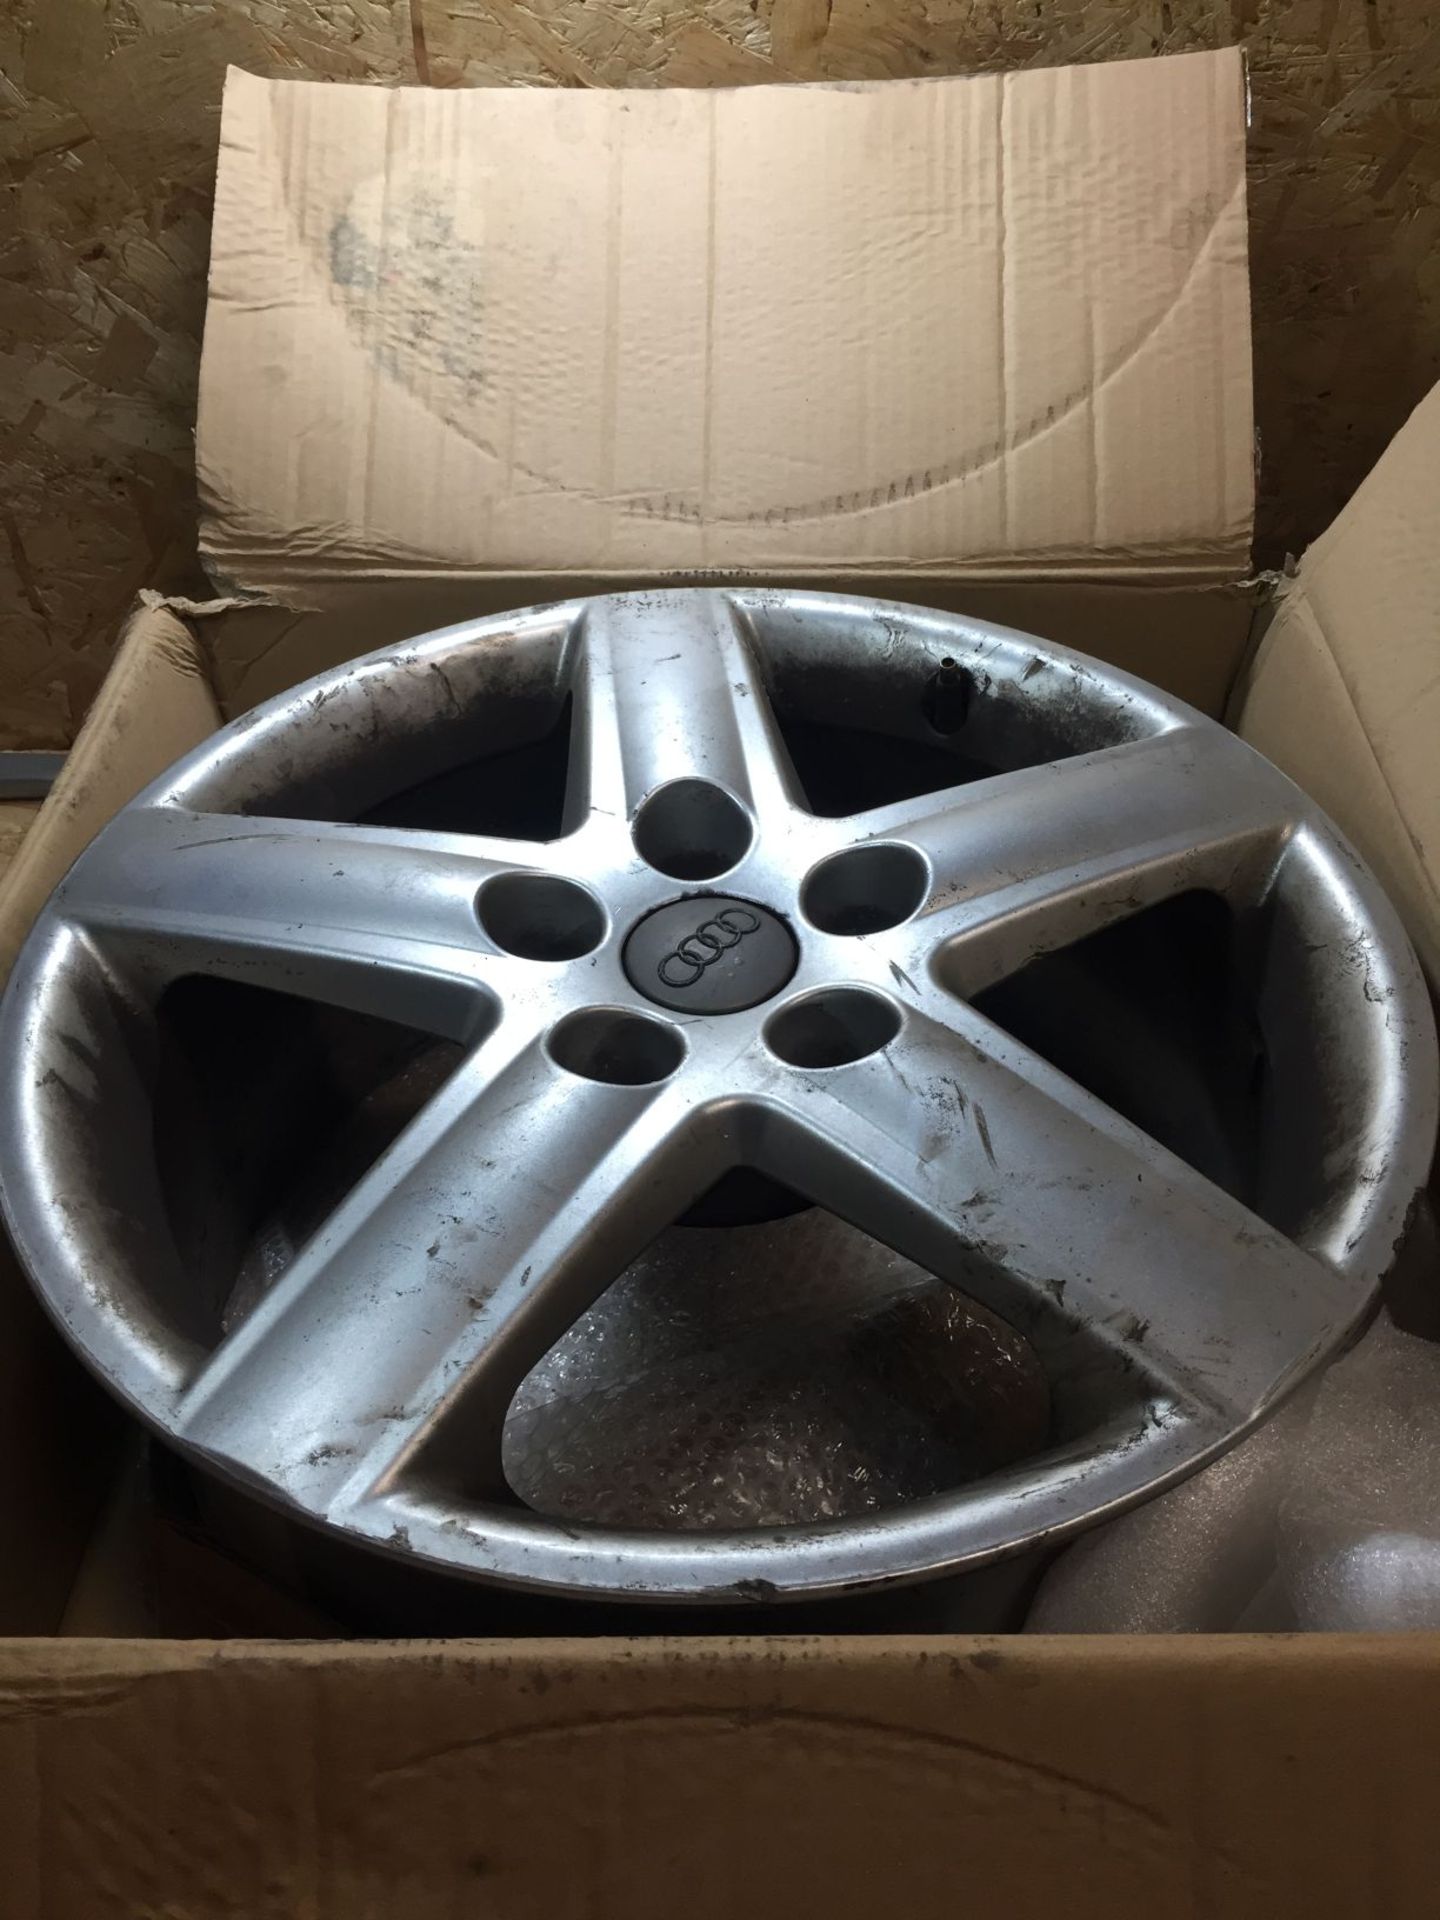 1 X LOT TO CONTAIN A SET OF 4 AUDI A6 C6 5 SPOKE 17" ALLOY WHEELS X 4 / RRP £329.99 / HAVE BEEN PREV